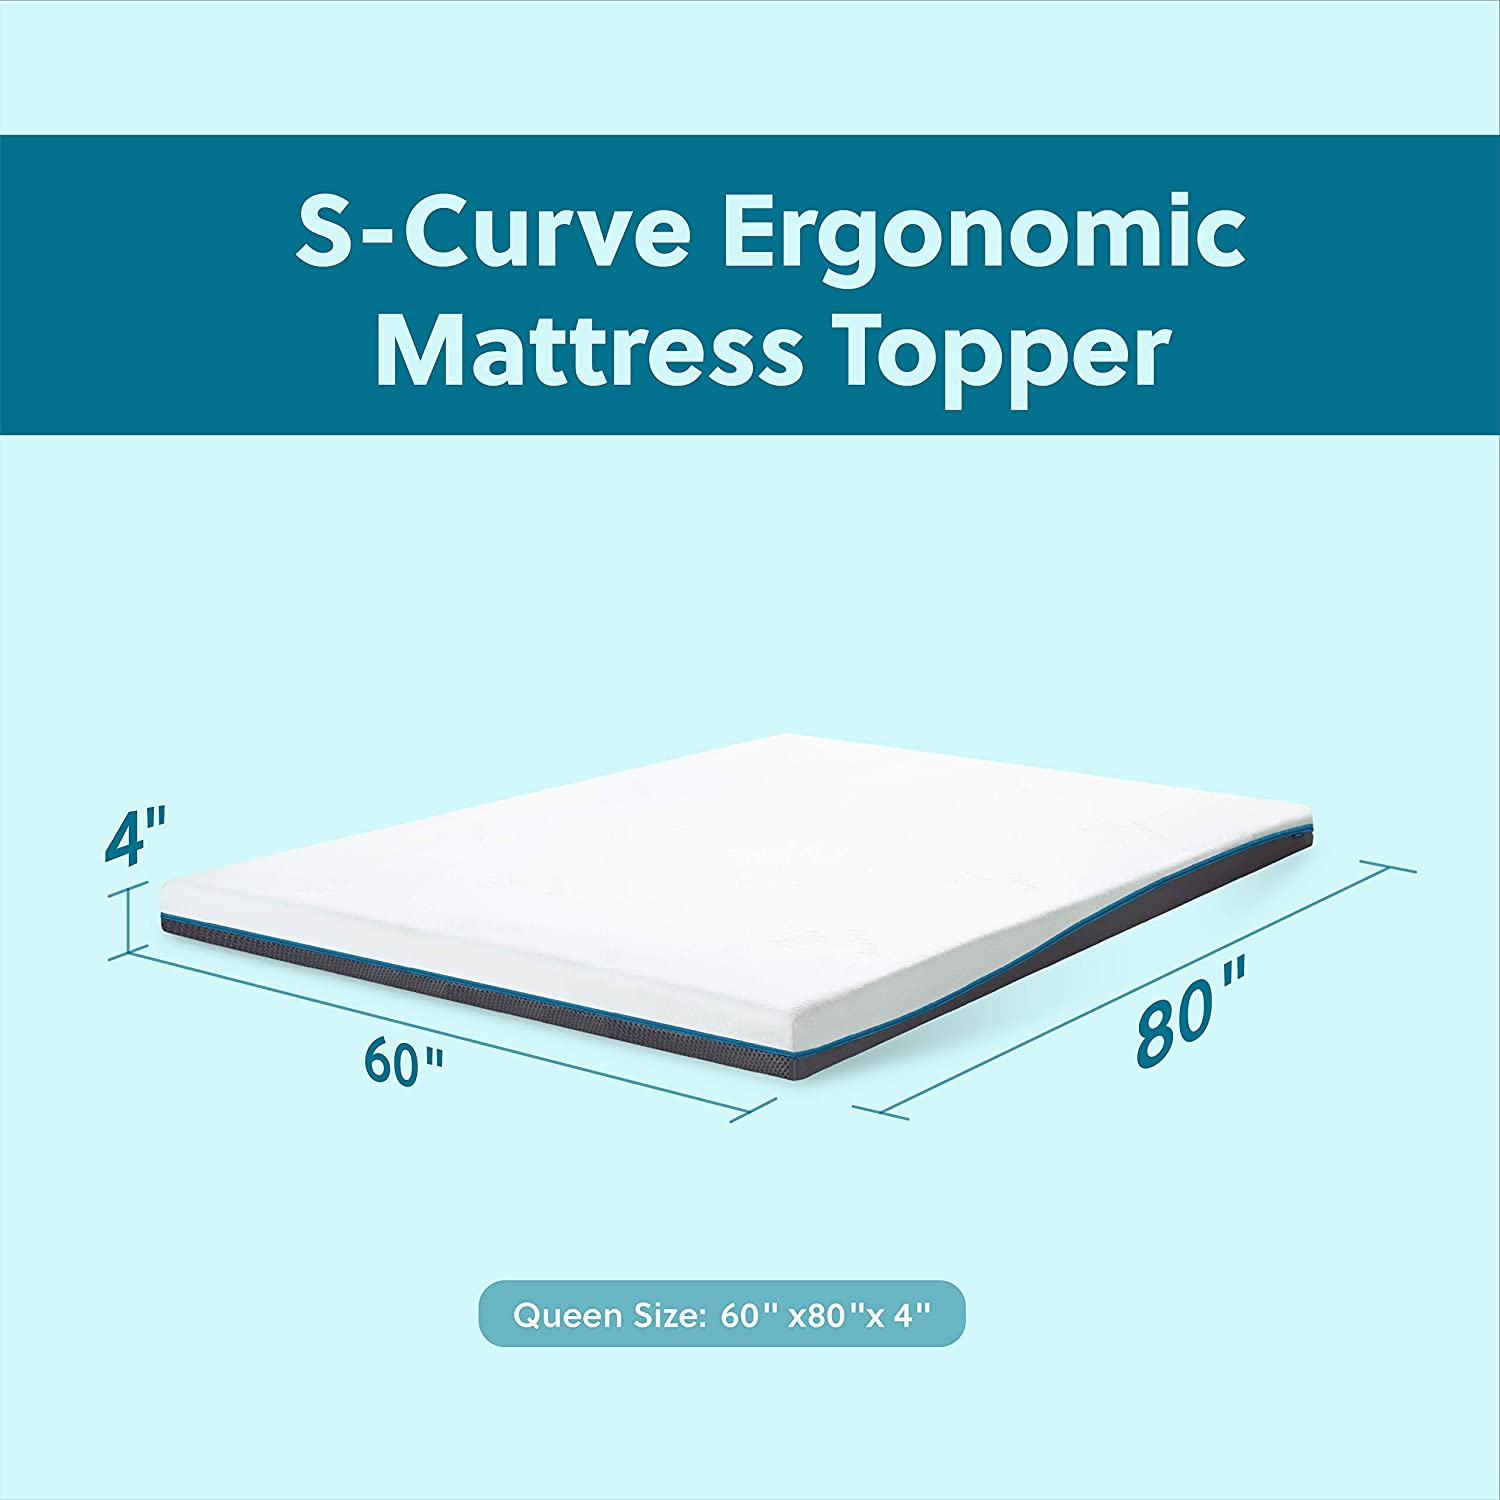 Reduce tossing and turning by getting a mattress topper for a side sleeper that absorbs motion and is still thick enough to support the body.